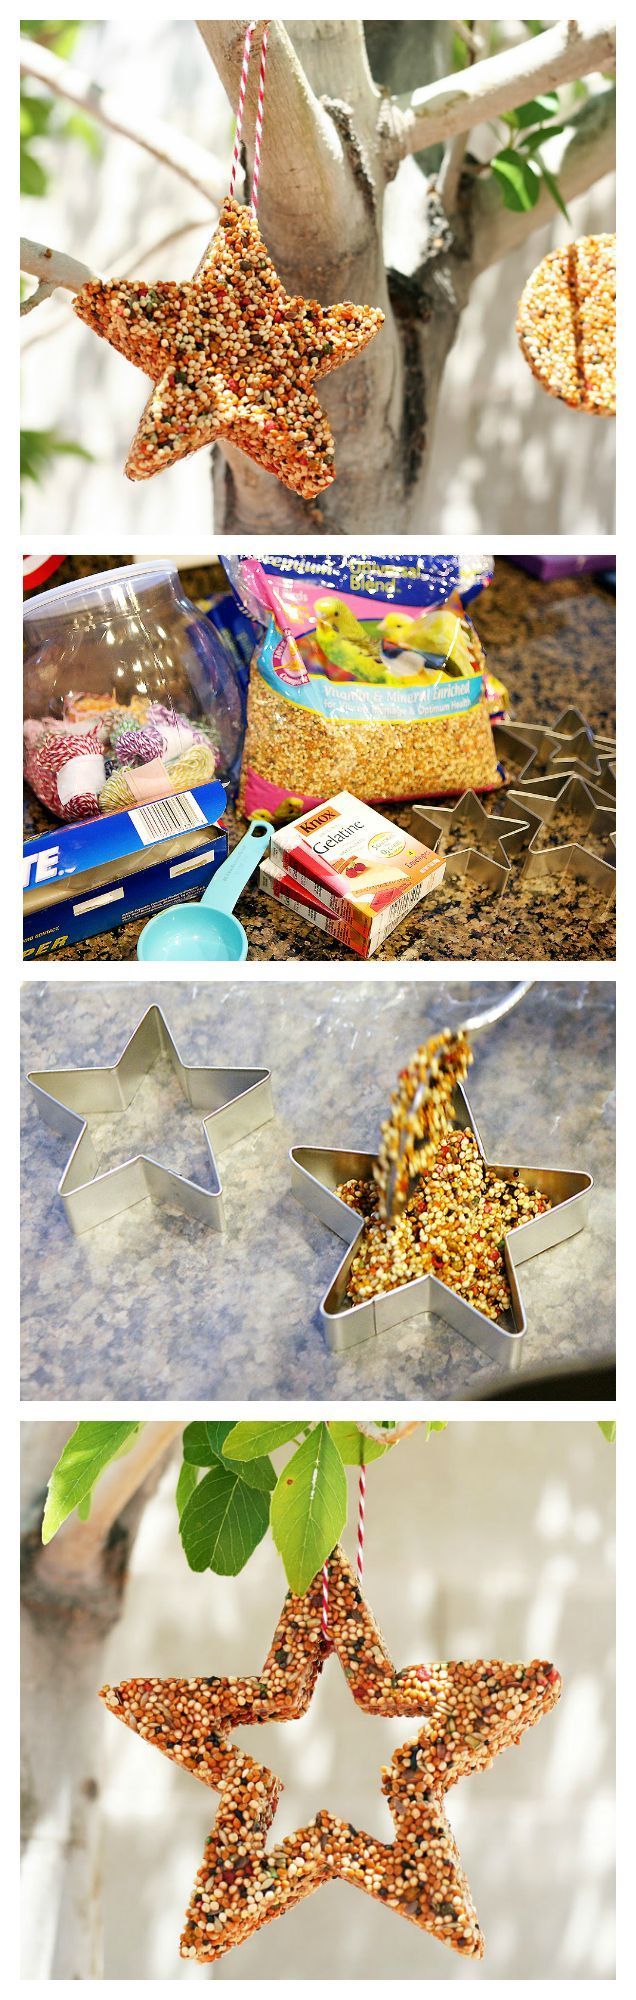 Bird Feeders That Are Fun For All Ages To Make